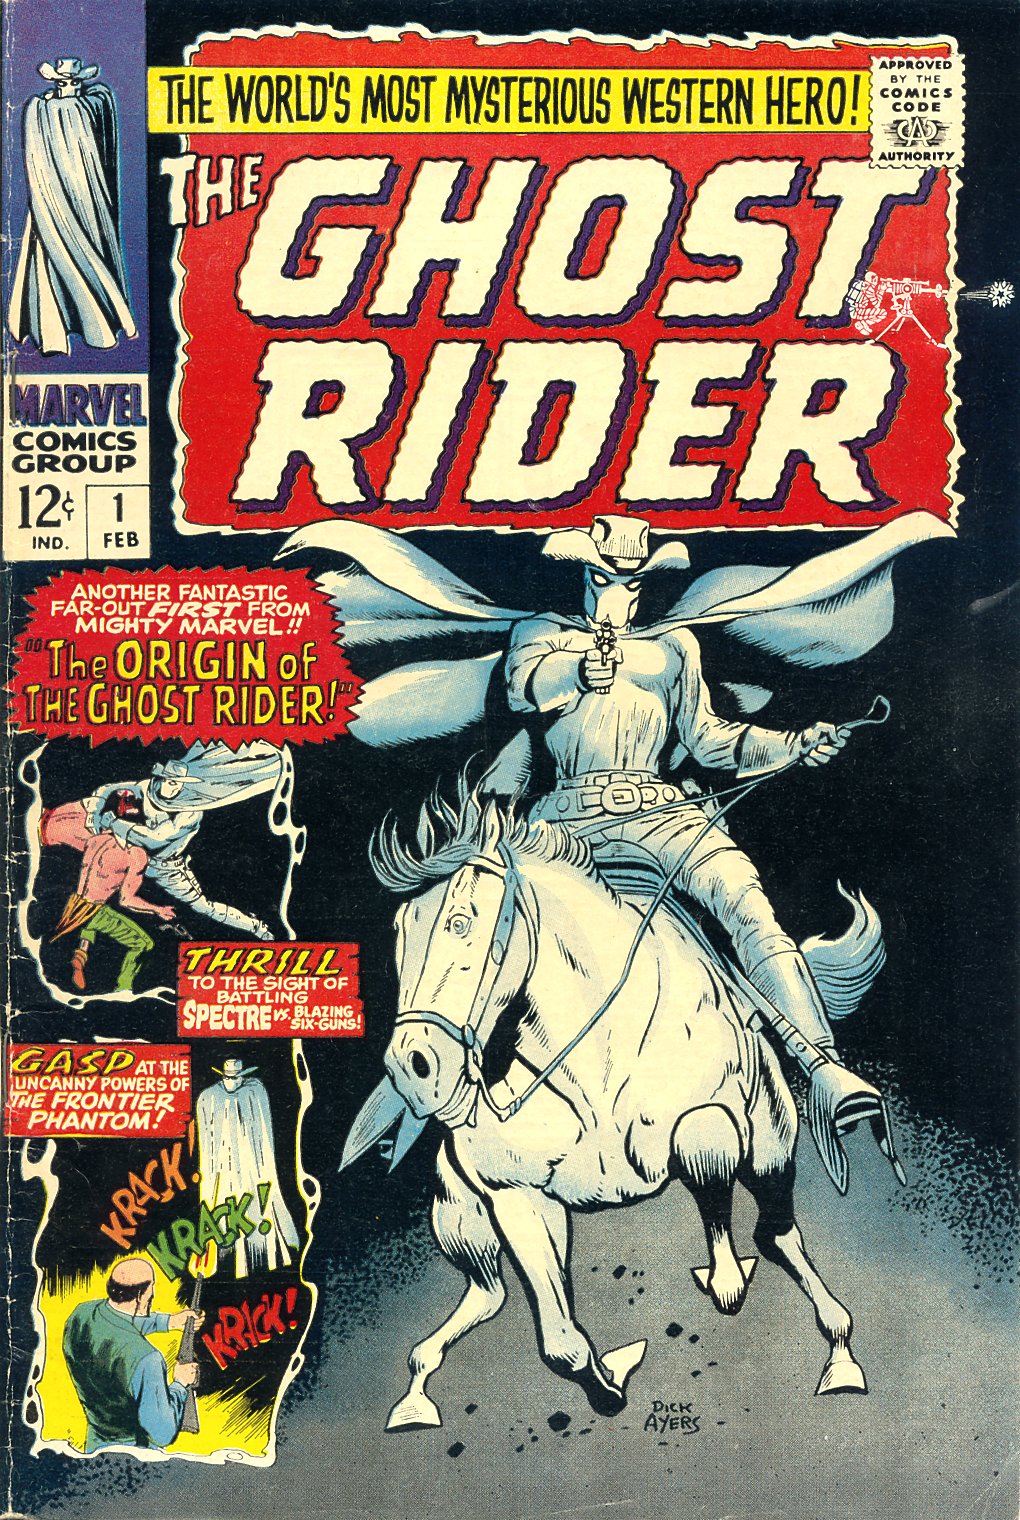 Read online The Ghost Rider comic -  Issue #1 - 1